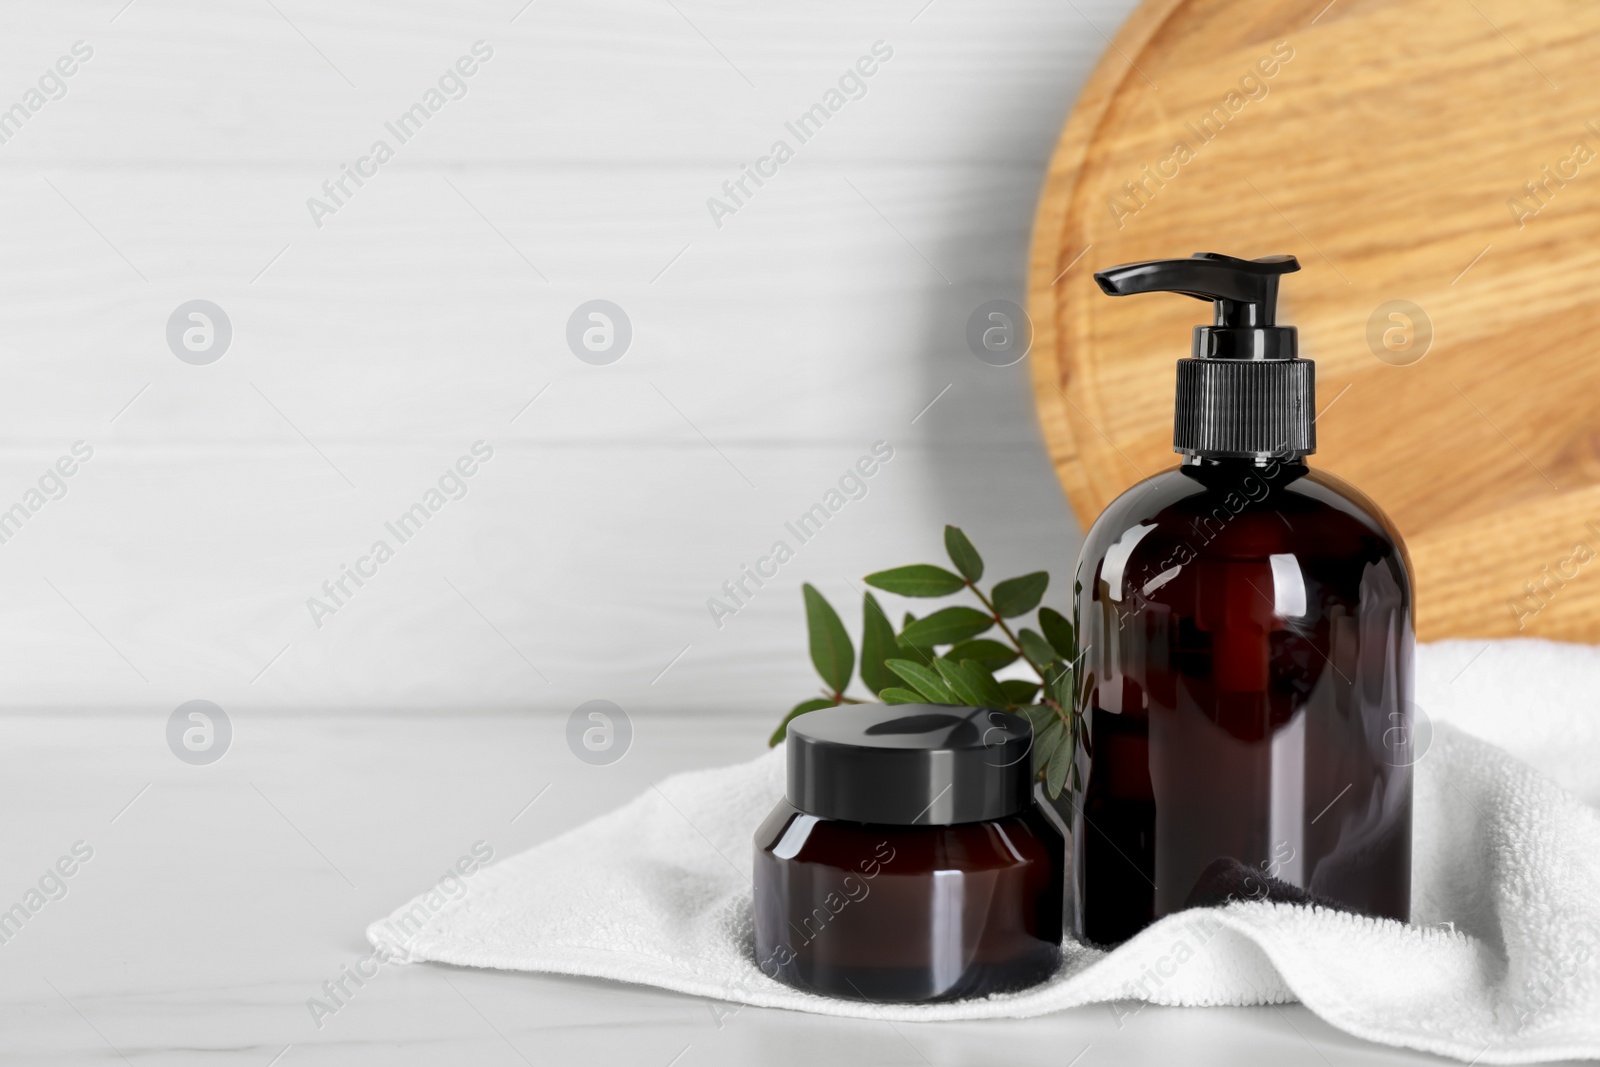 Photo of Shampoo bottle, hair mask and towel on white wooden table, space for text